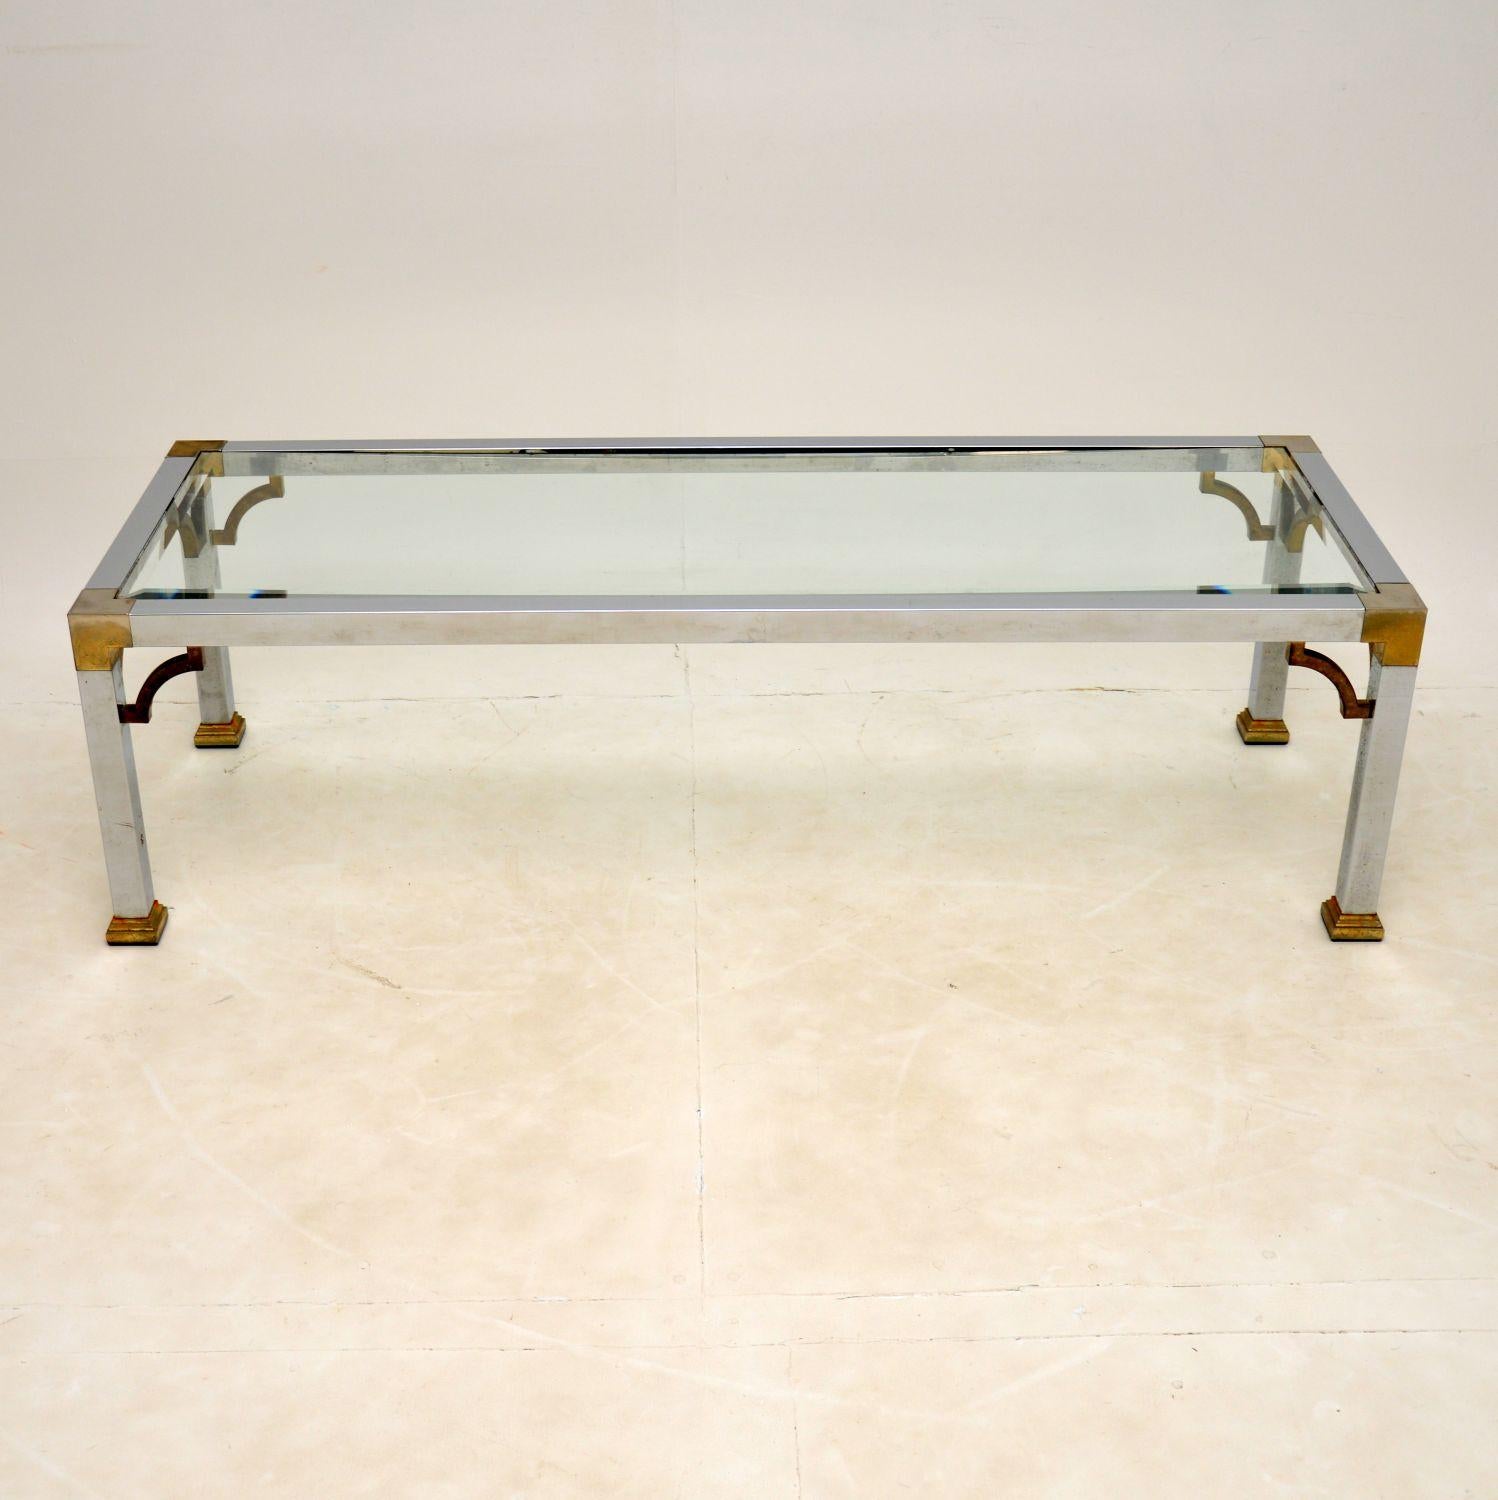 A stunning vintage coffee table in chrome and brass plated aluminium. This was made in England, it dates from the 1960-70’s.

Beautifully styled and of great proportions, this is also very well made. The brass plated corners have worn and faded in